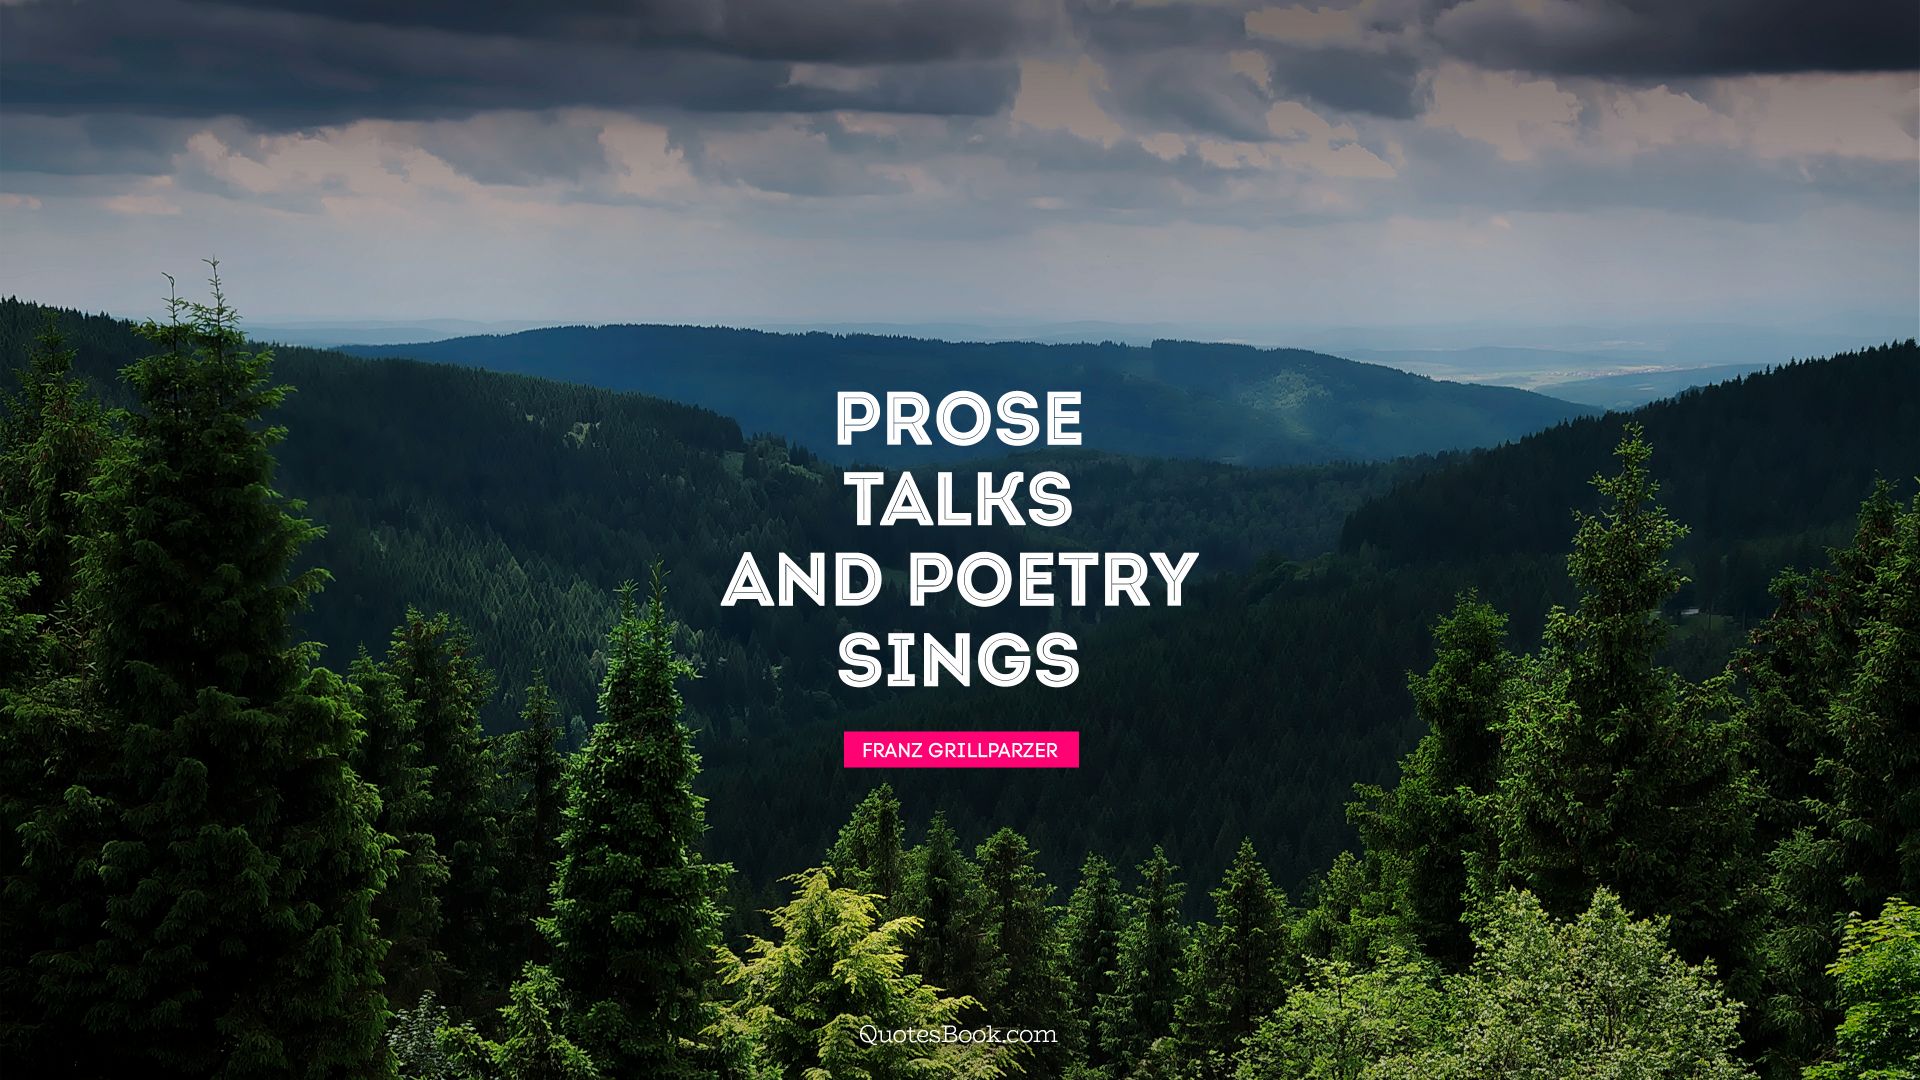 Prose talks and poetry sings. - Quote by Franz Grillparzer